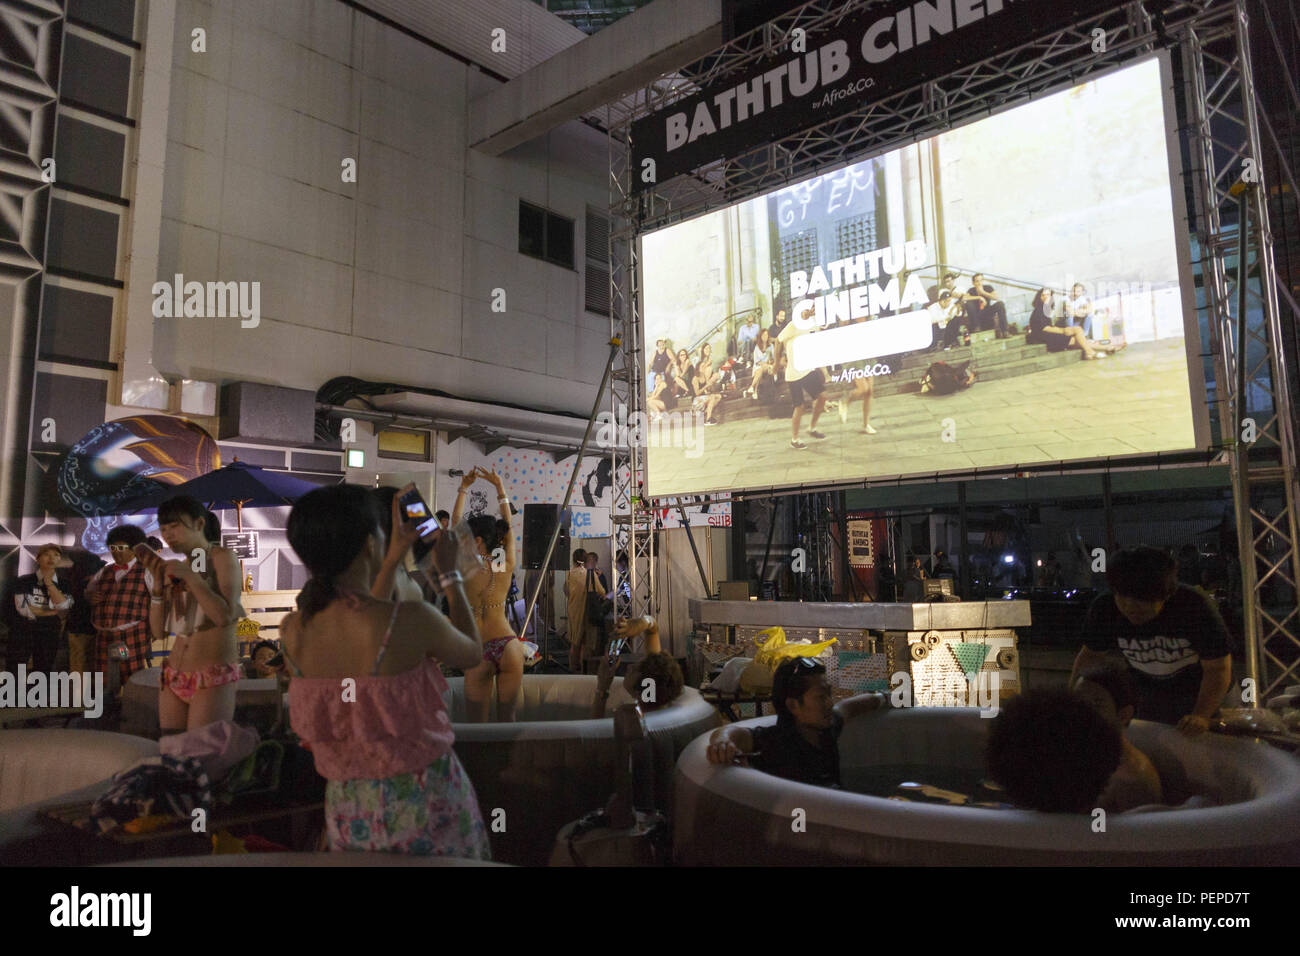 Tokyo Japan 17th Aug 18 People Gather To See A Movie In Small Inflatable Water Pools On The Rooftop Of The Revamped Magnet By Shibuya109 Building In Tokyo Bathtub Cinema Is Held